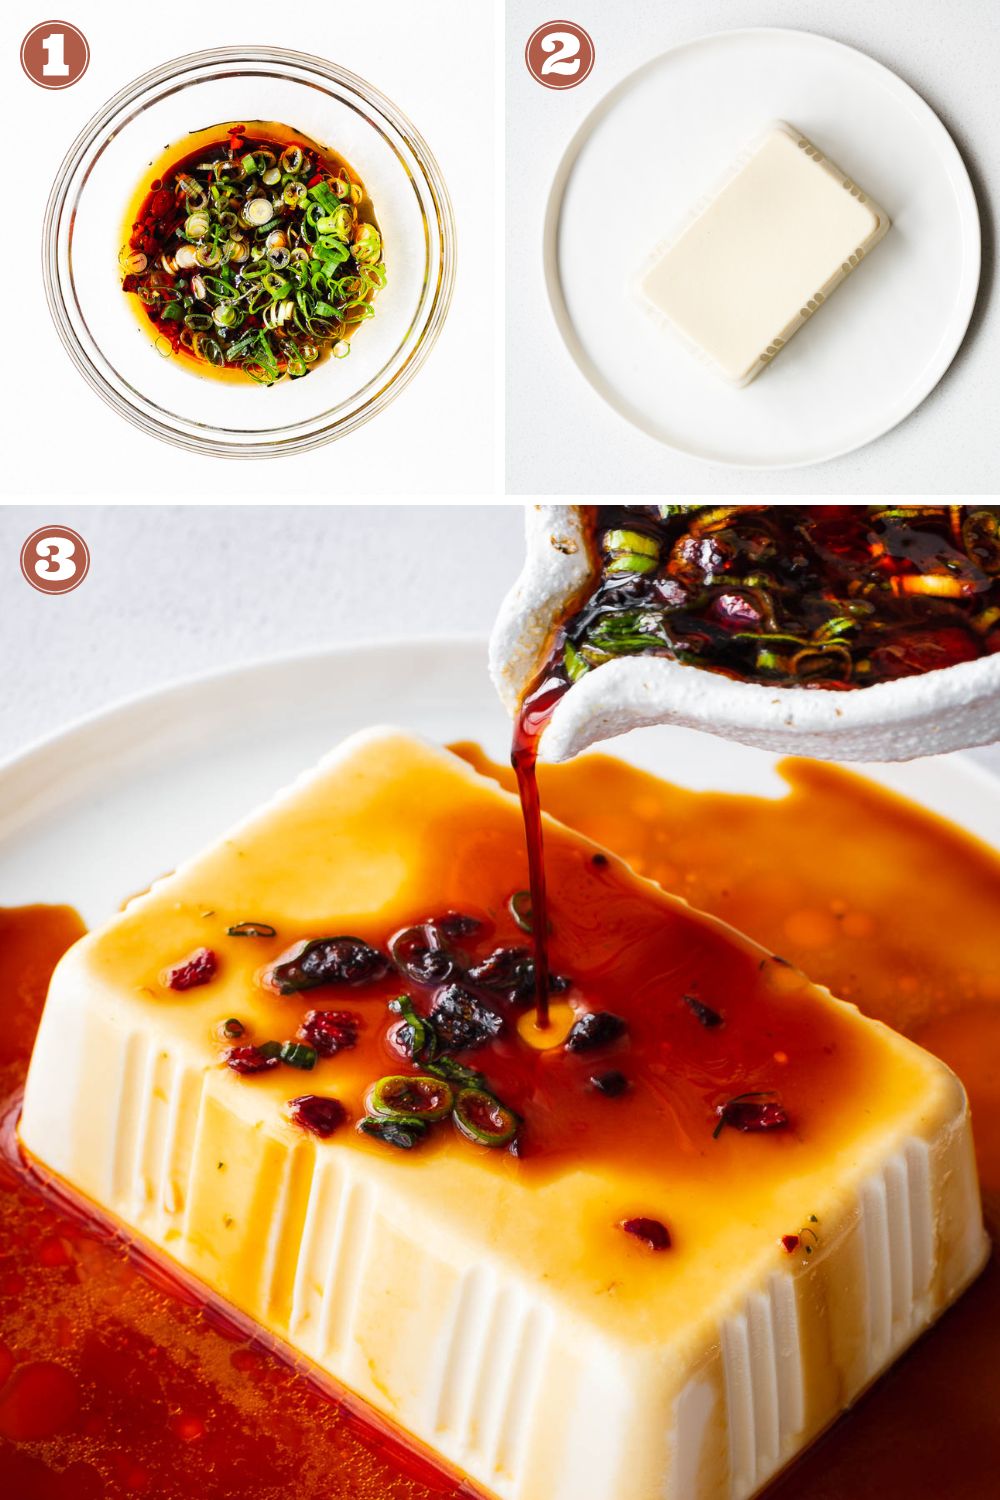 How to make silken tofu with soy sauce composite image in three steps: Make the marinade, drain the tofu and pour the spicy soy sauce over the smooth tofu block.